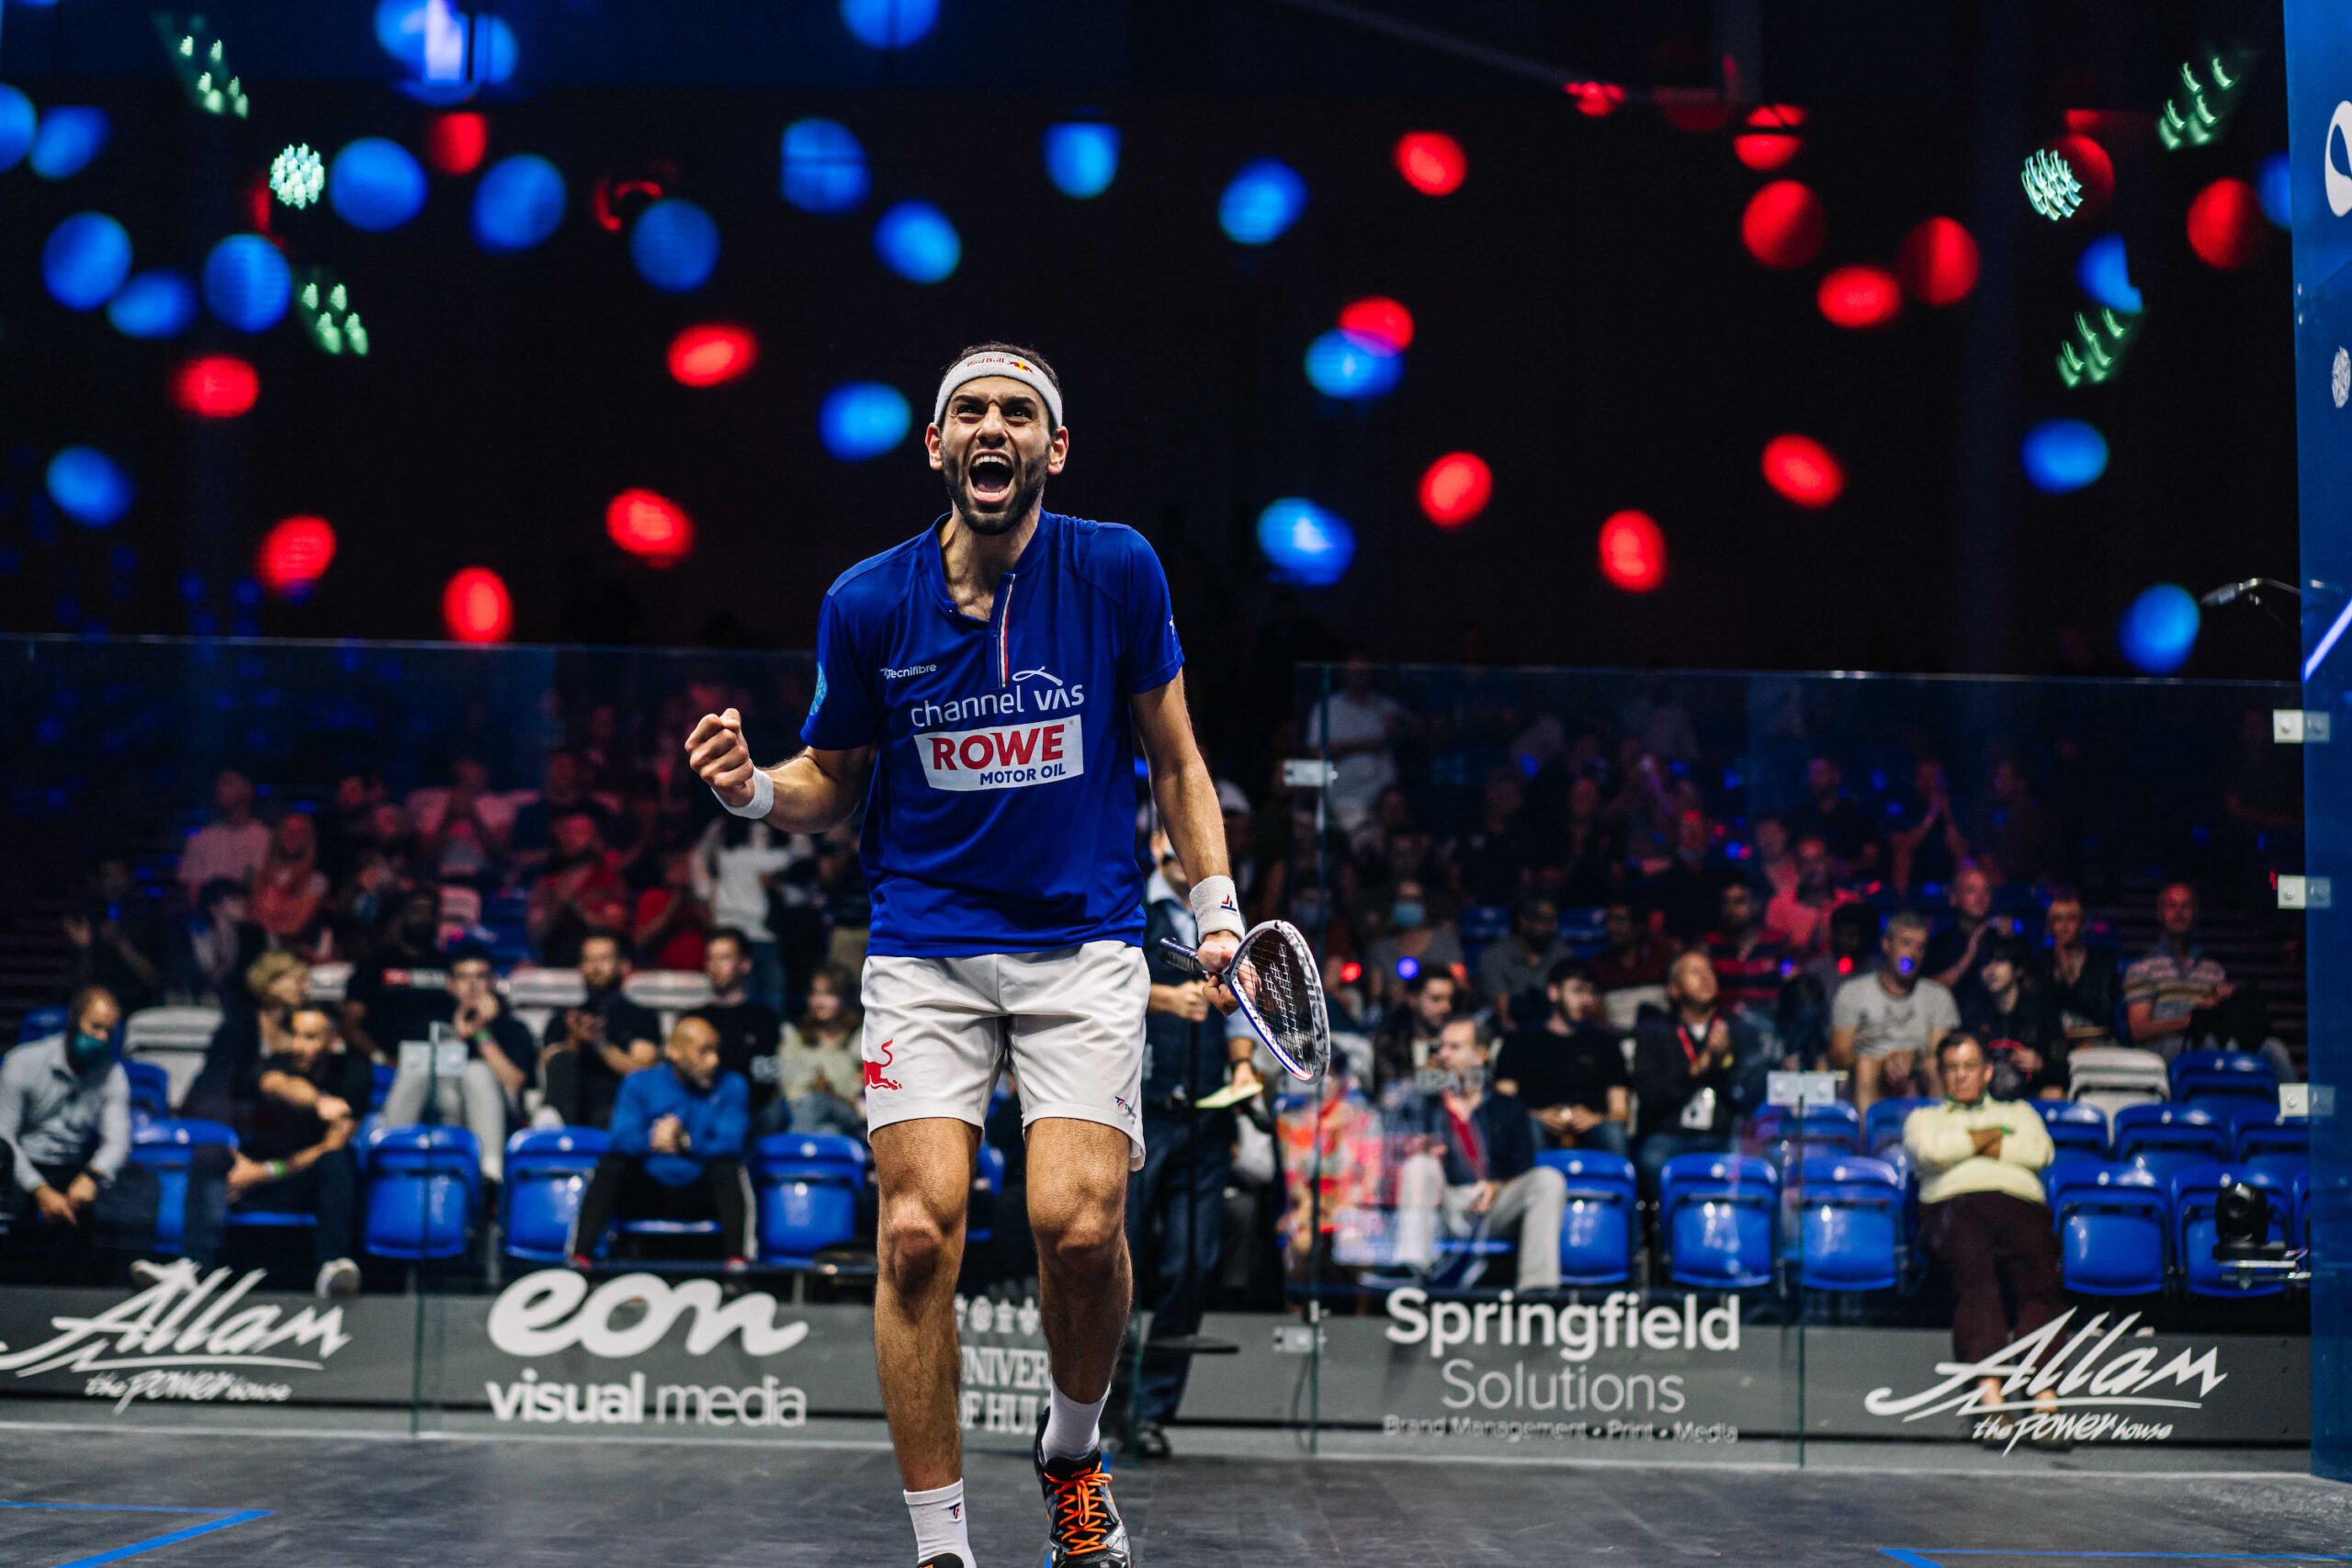 Mohamed ElShorbagy is a three-time British Open champion